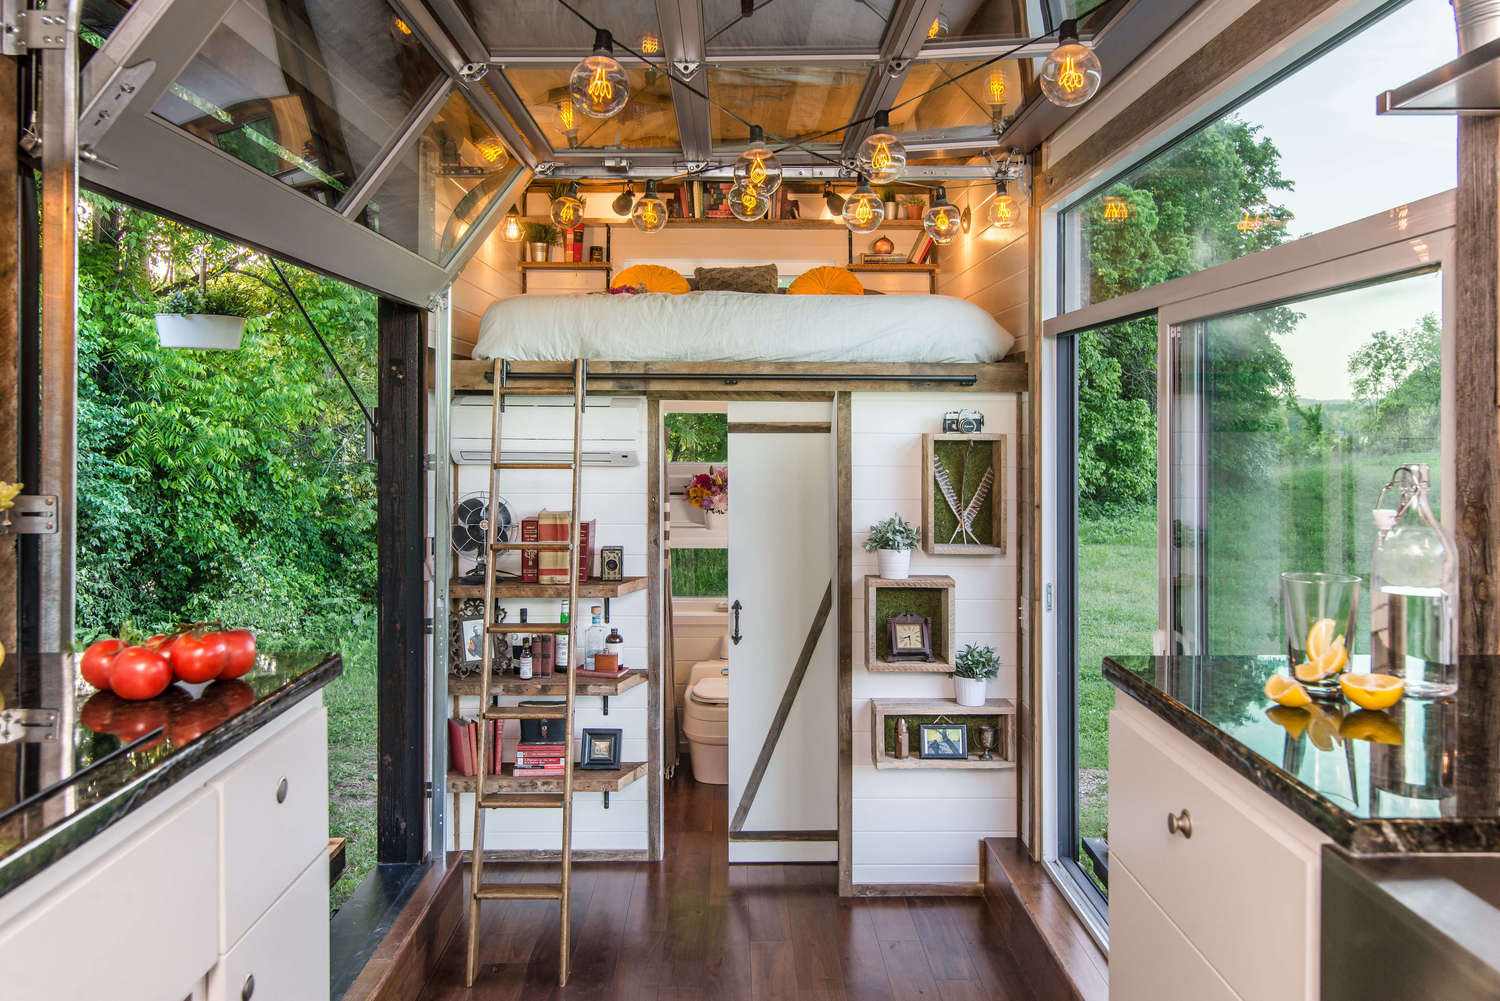 Interior of tiny home with multi-level living space, showcasing a ladder to the bed and white/wood finishes throughout the design.